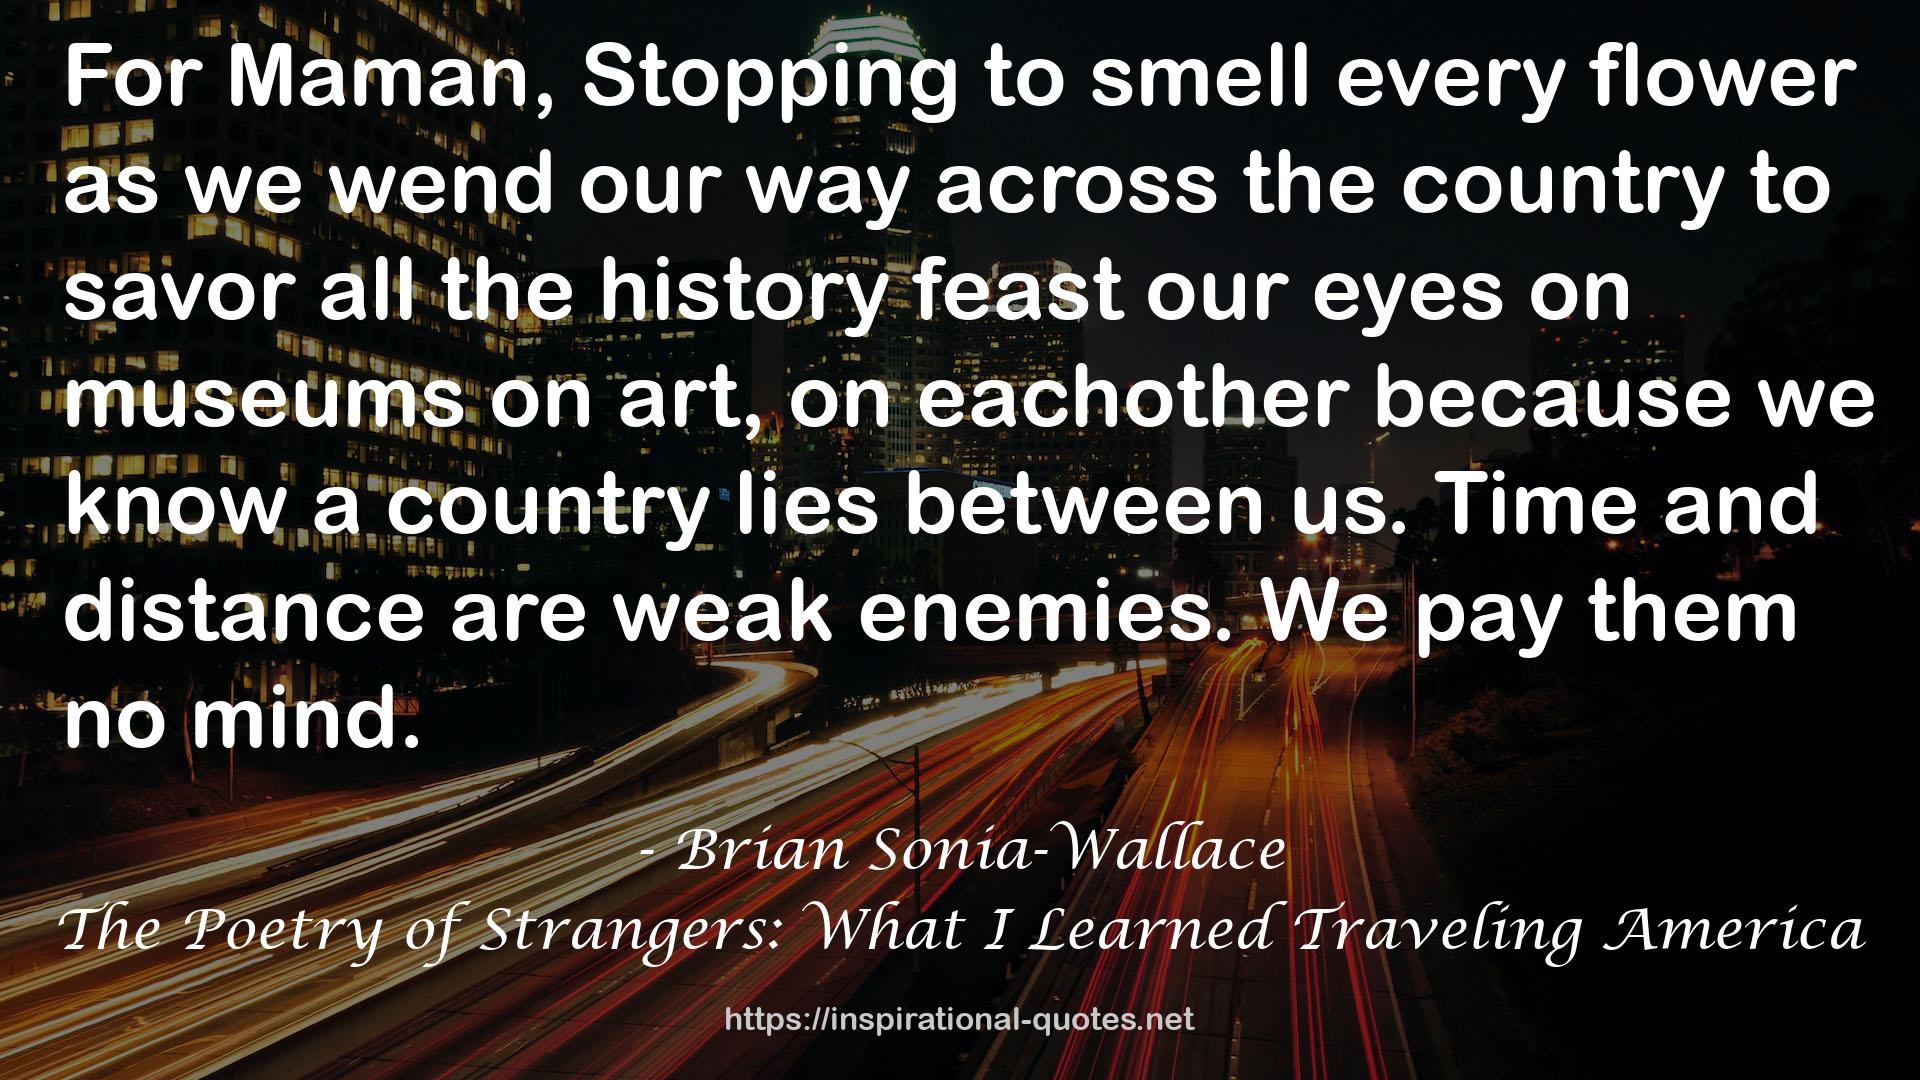 The Poetry of Strangers: What I Learned Traveling America QUOTES